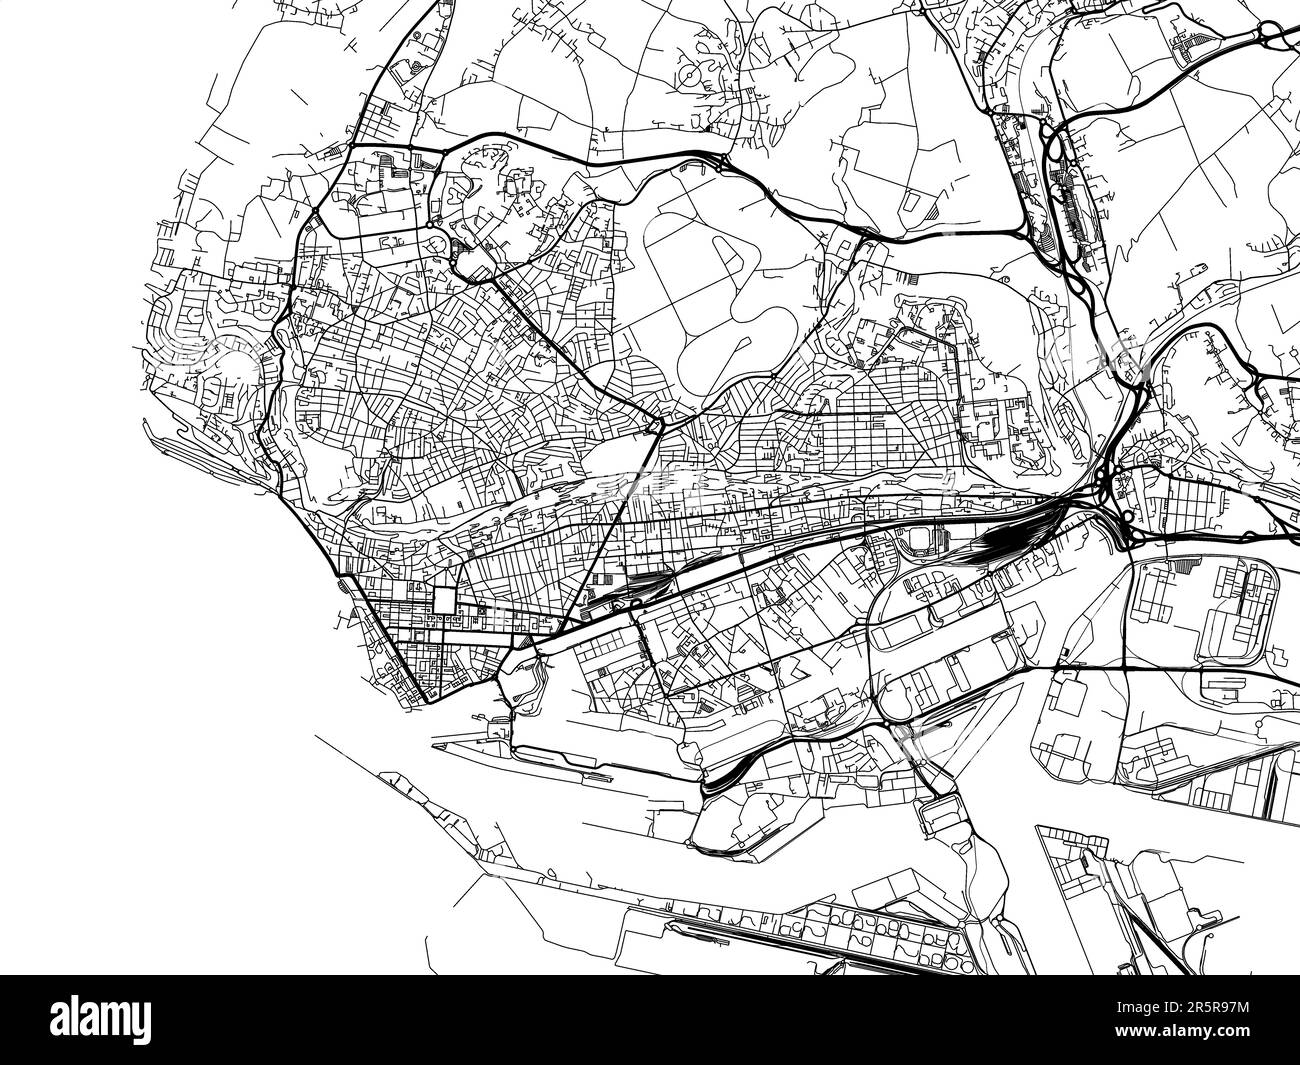 Road map of the city of  Le Havre in France on a white background. Stock Photo